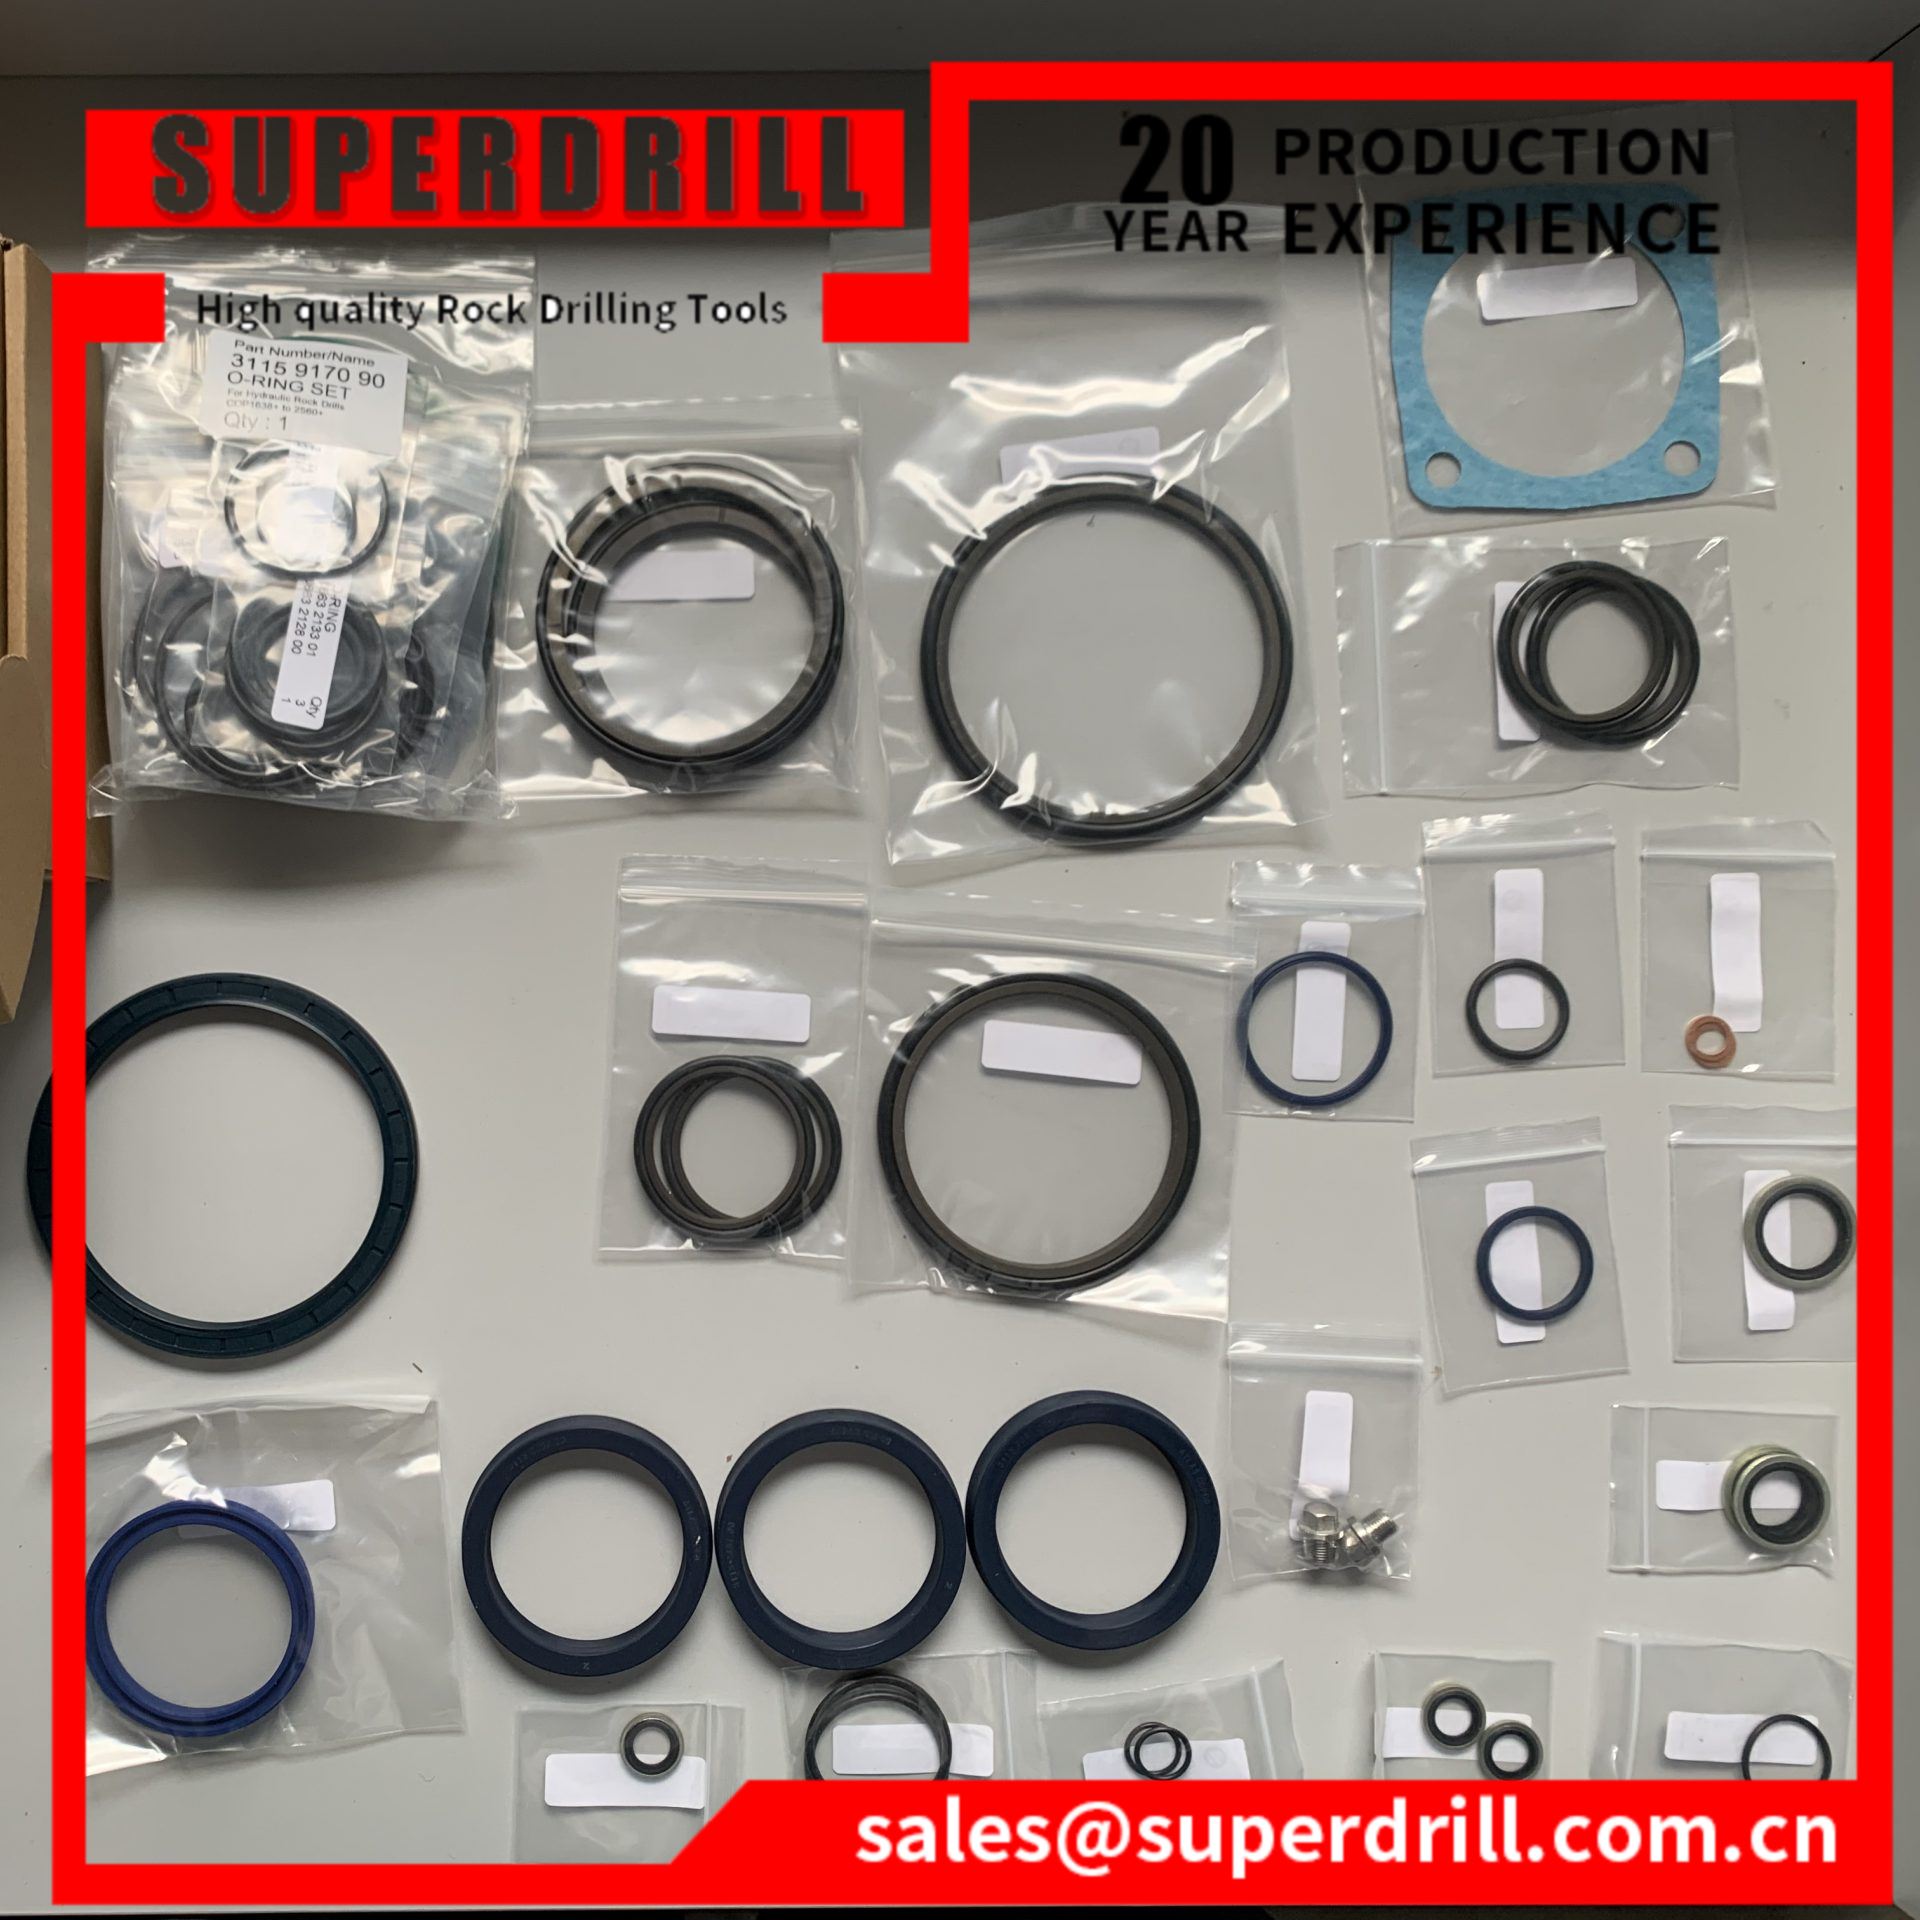 3115917092/sealing Package For Overhaul Of Rock Drill/cop1838+/drilling Rig Parts